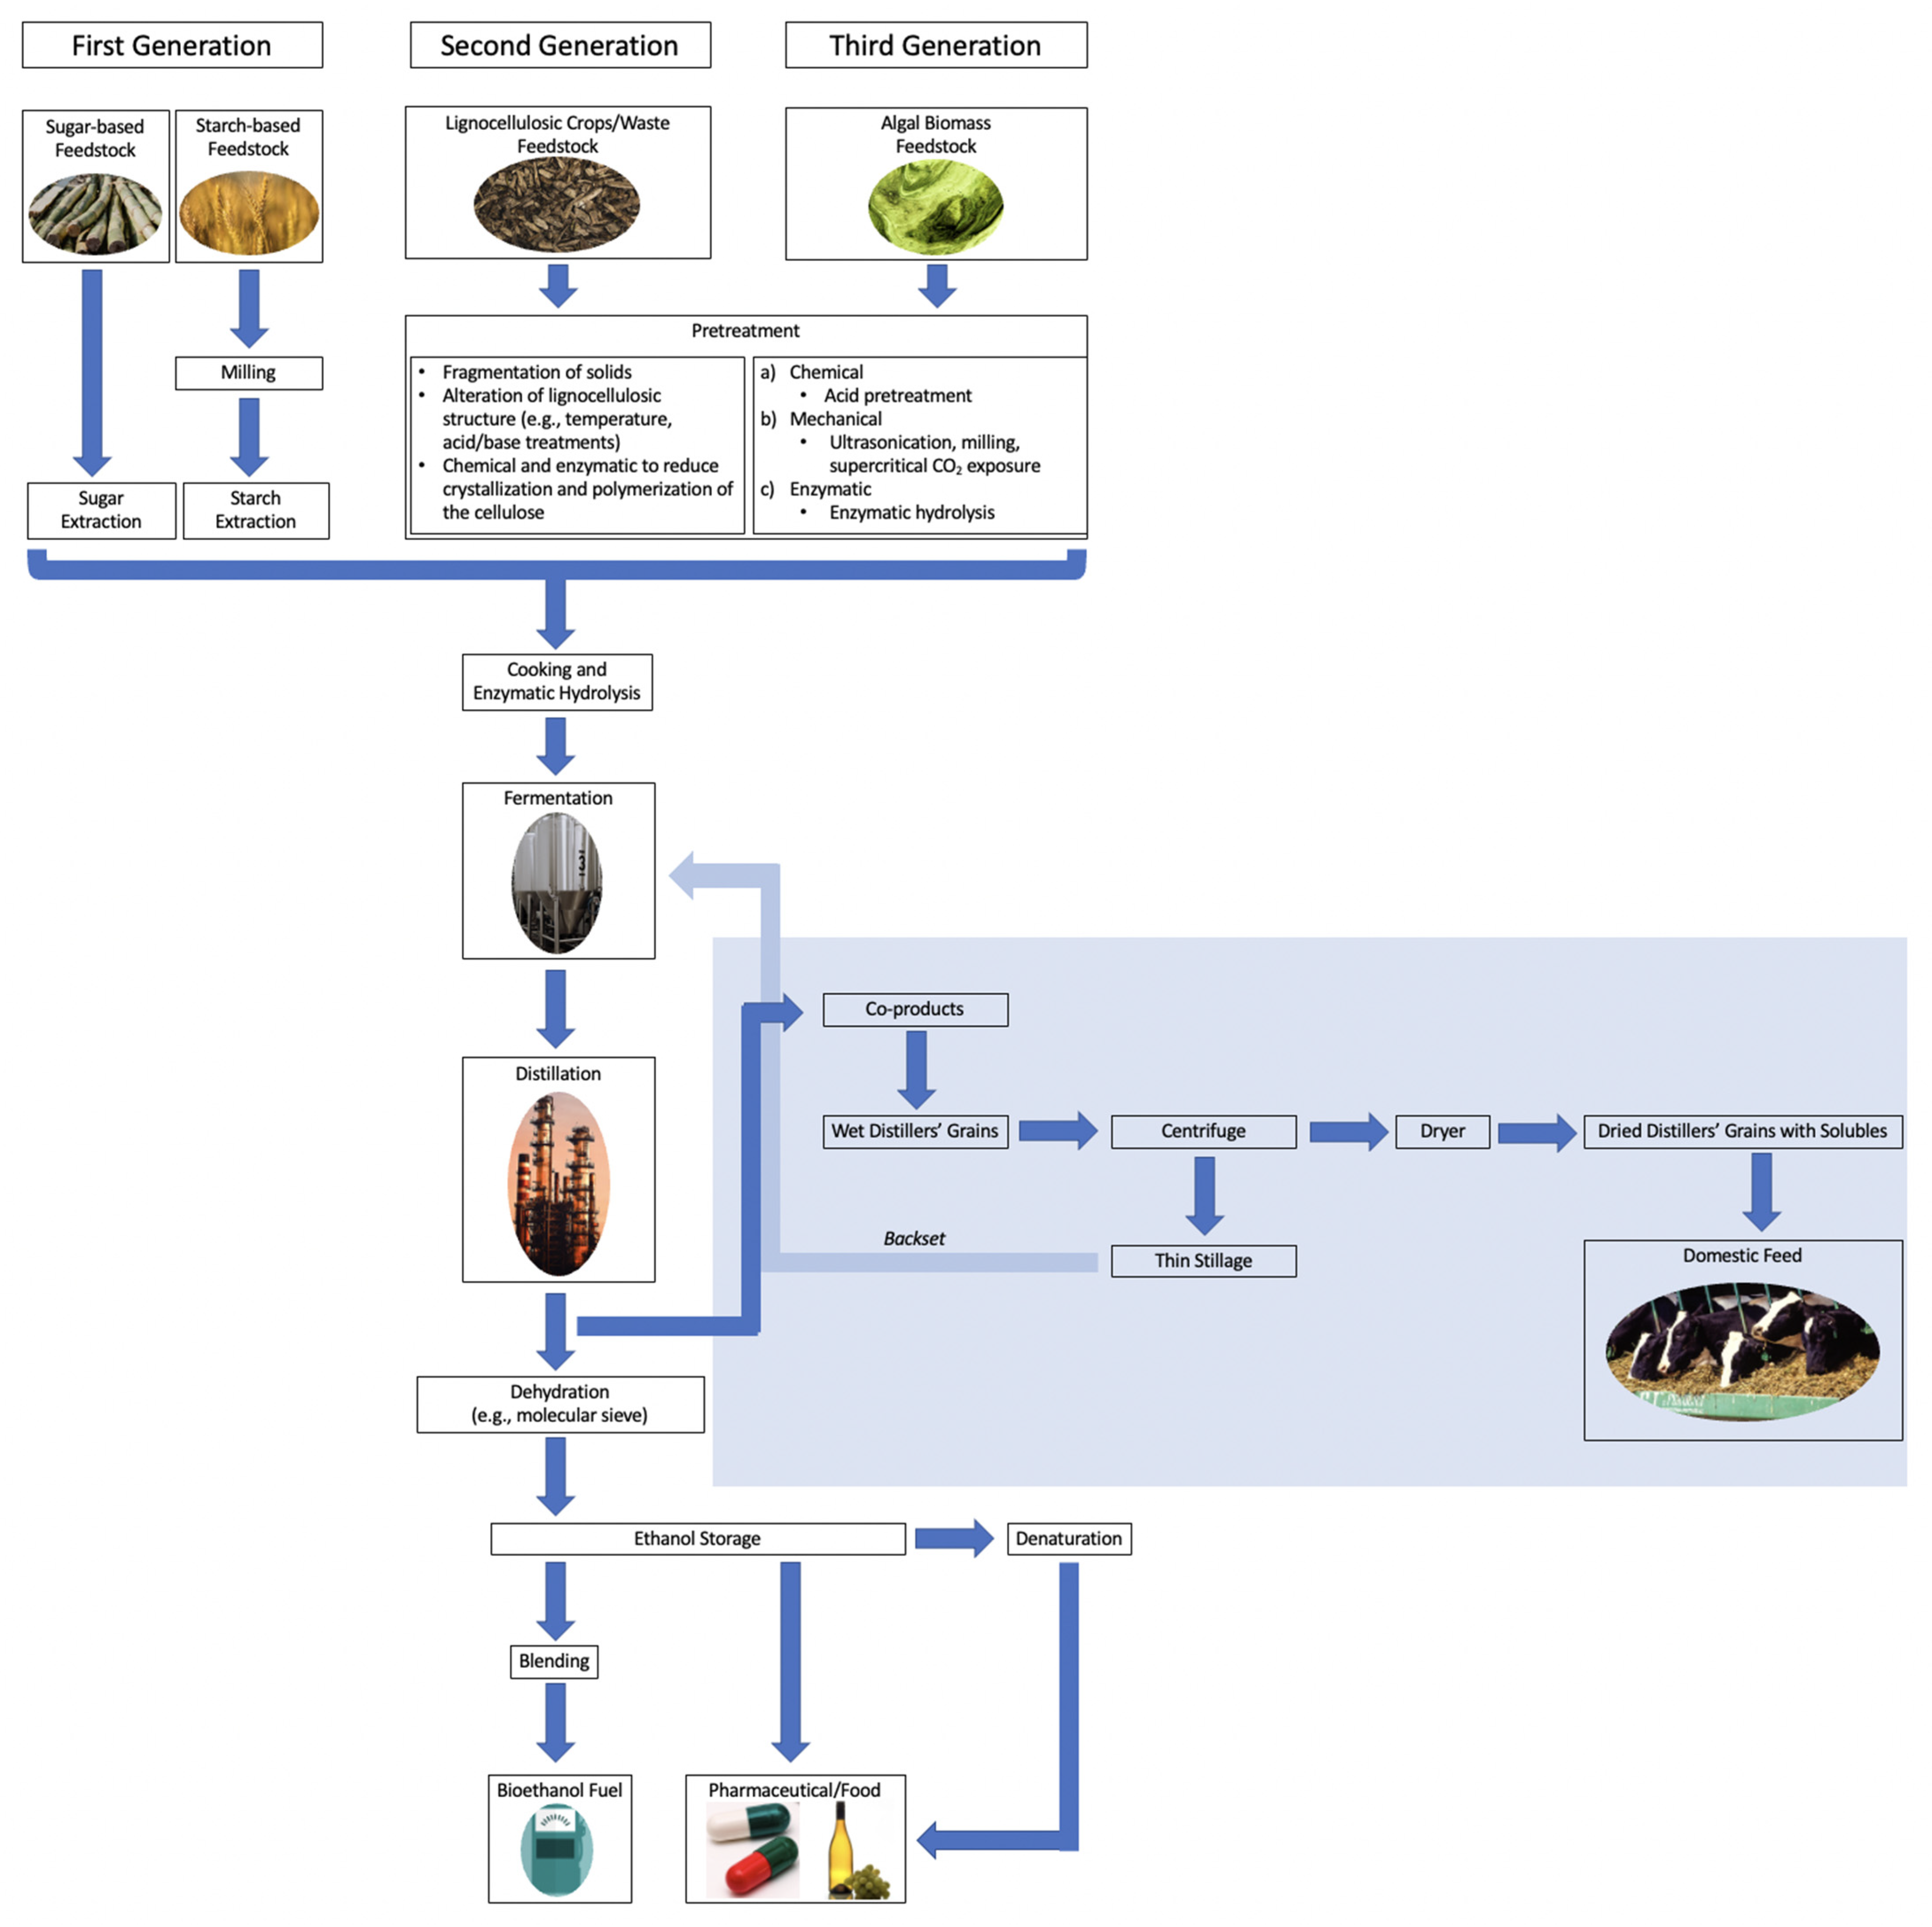 Production process of bioethanol and its blending with